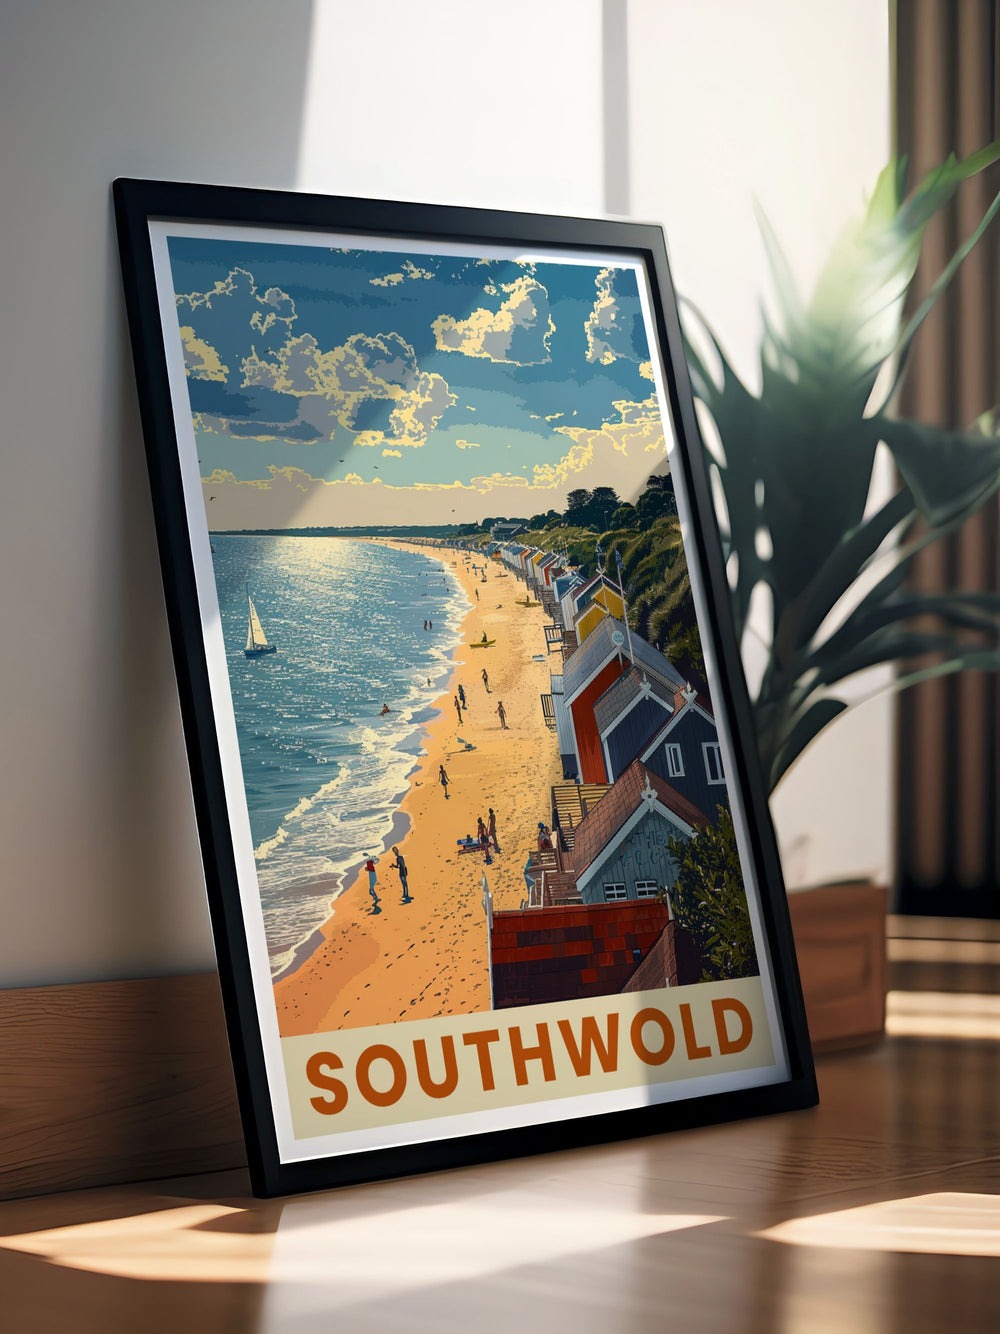 Vintage Travel Print of Southwold showcasing the beautiful beach and beach huts along with the charming Southwold Lighthouse and pier a perfect addition to any home or office space bringing the serenity of seaside living into your environment